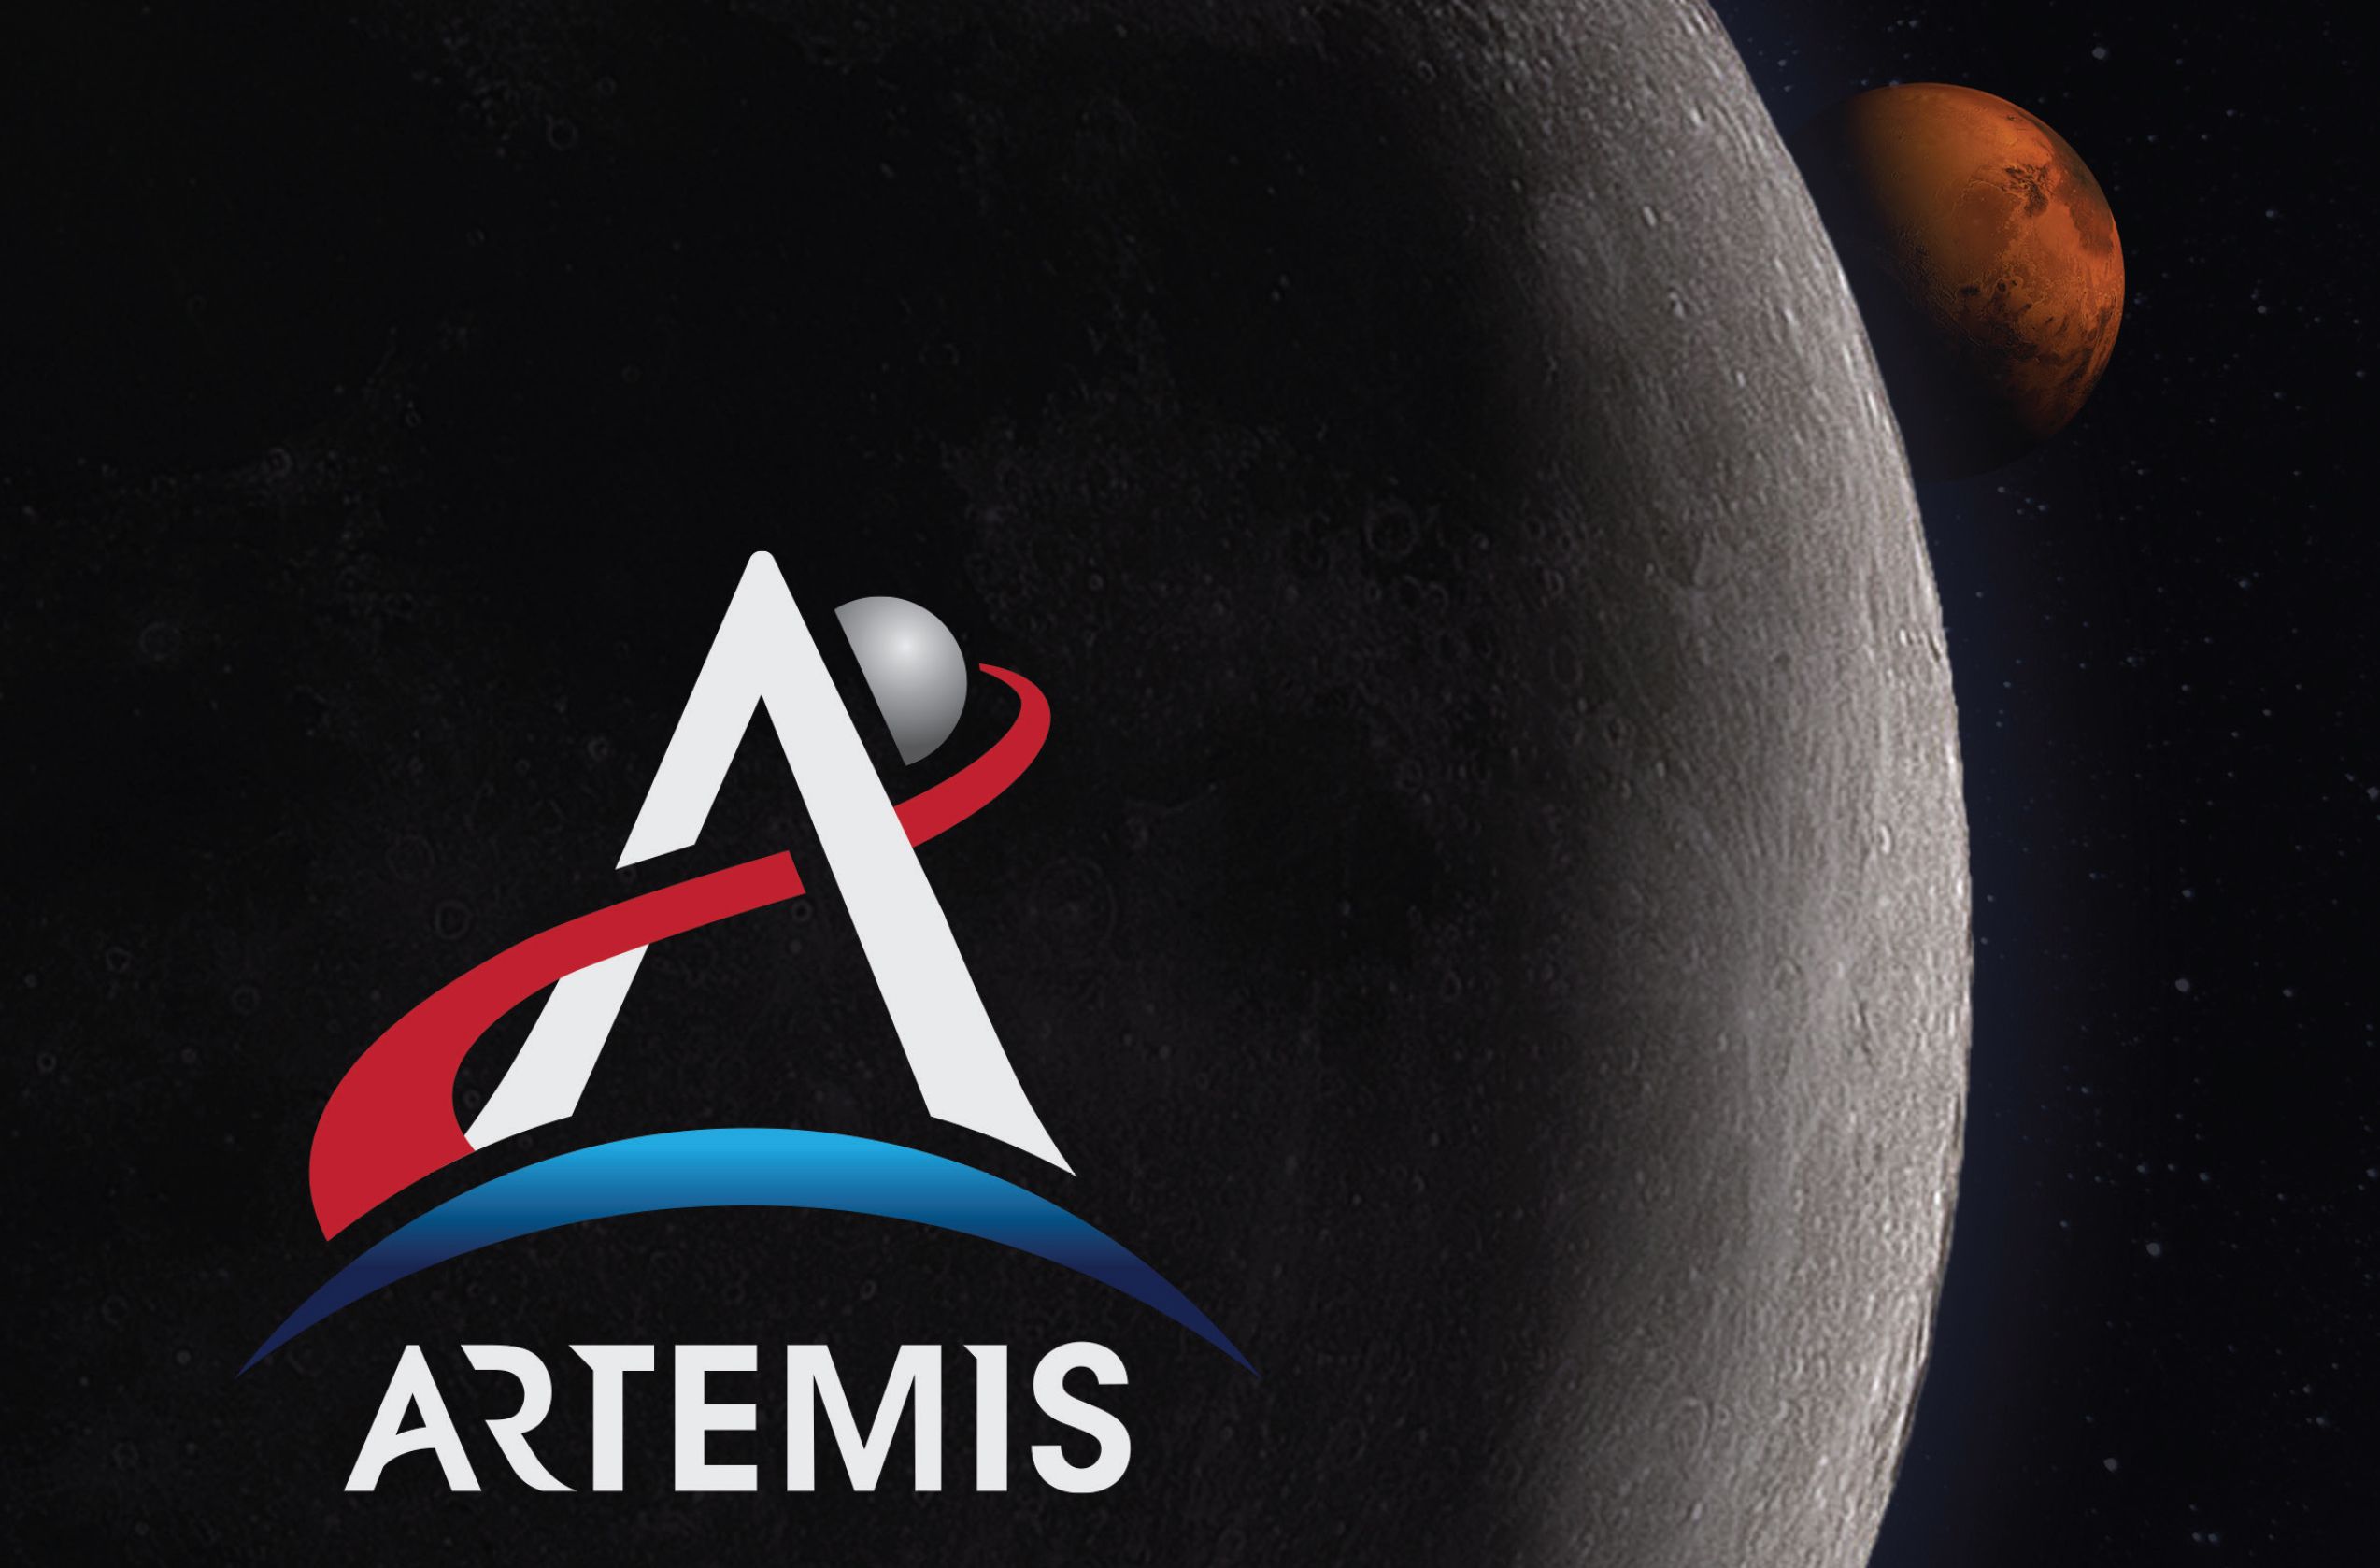 Artemis Is Taking Astronauts to the Moon